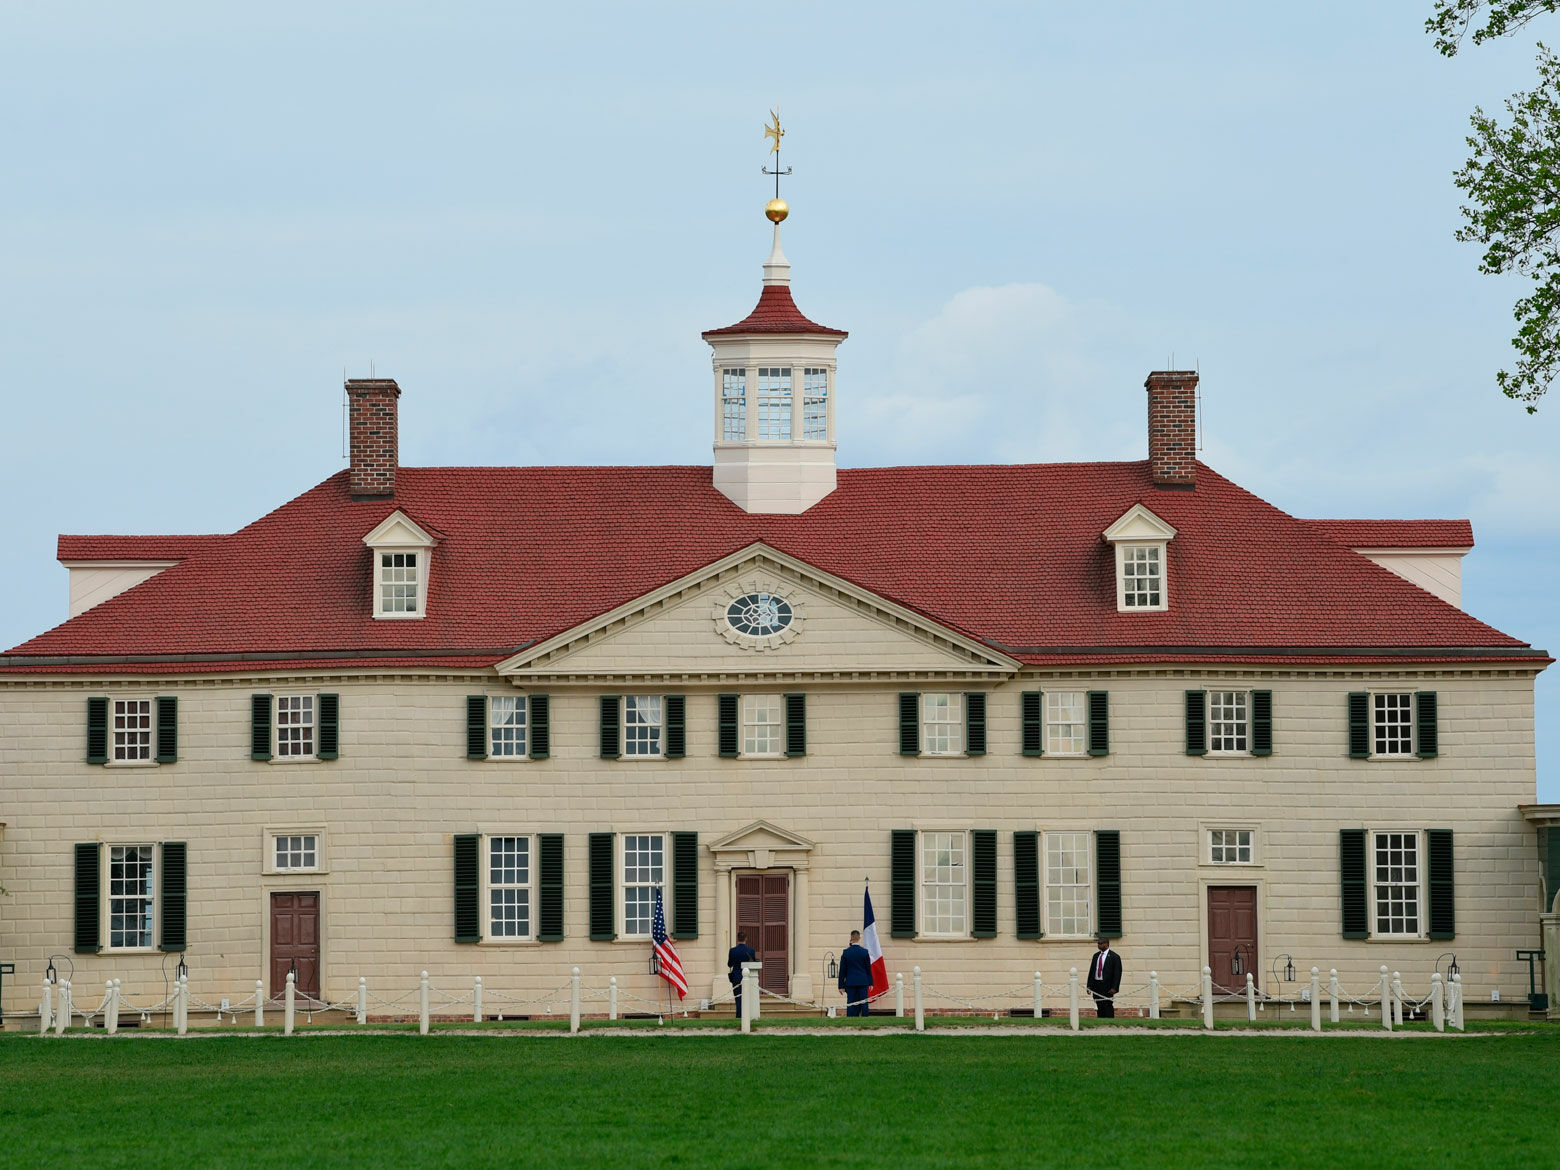 <p>One of the special tours offered at George Washington&#8217;s Mount Vernon estate is of the distillery. Each year, the estate produces rye whiskey of the same style the nation&#8217;s first president distilled when he lived there.</p>
<p>Tours are offered during <a href="https://www.mountvernon.org/plan-your-visit/calendar/events/distillery-gristmill-tours/" target="_blank" rel="noopener">weekends in September</a>, including on Labor Day weekend.</p>
<p>The tour on Sept. 5 includes a whiskey tasting.</p>
<p>There&#8217;s also a virtual <a href="https://www.mountvernon.org/plan-your-visit/calendar/events/virtual-george-washington-patriot-run/" target="_blank" rel="noopener">George Washington Patriot Run</a>, where participants can submit their 5k and 10-miler times between Sept. 1 and Sept. 12.</p>
